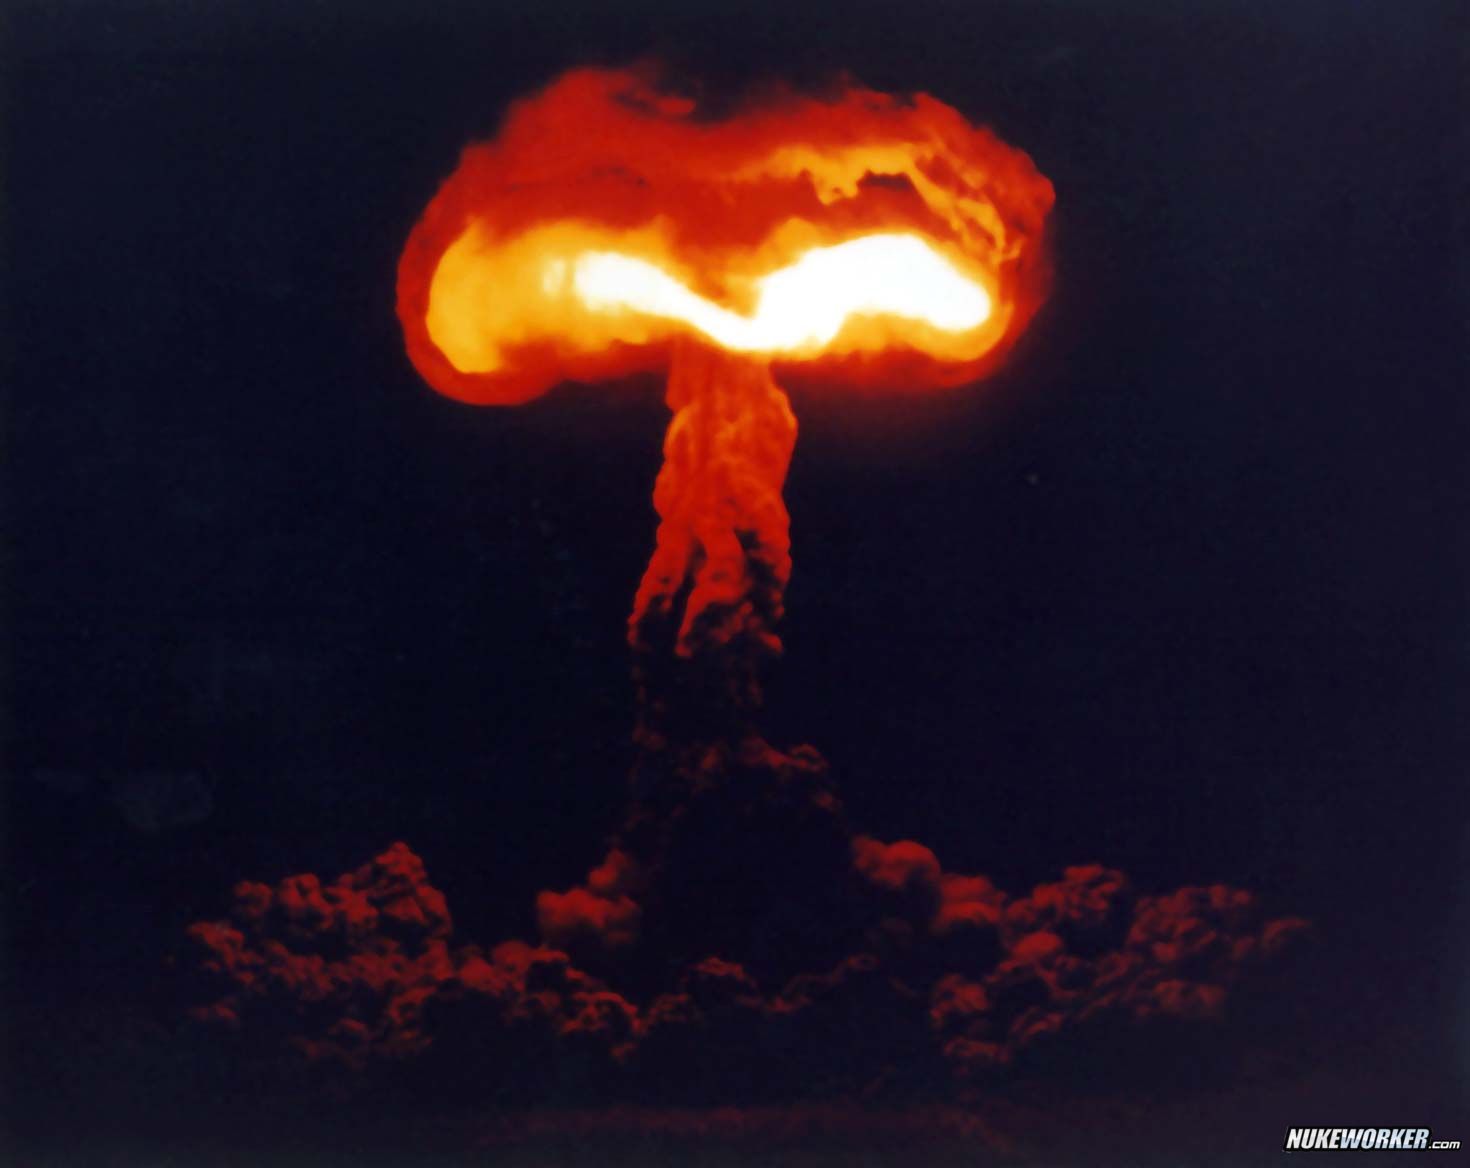 HOOD
HOOD, conducted at the Nevada Test Site on July 5, 1957 was a 74 kiloton device exploded from a balloon.

Operation Plumbob, number 93, highest yield NTS atmospheric test. 
Keywords: Nevada Test Site, Mercury, Nye County, Nevada NTS